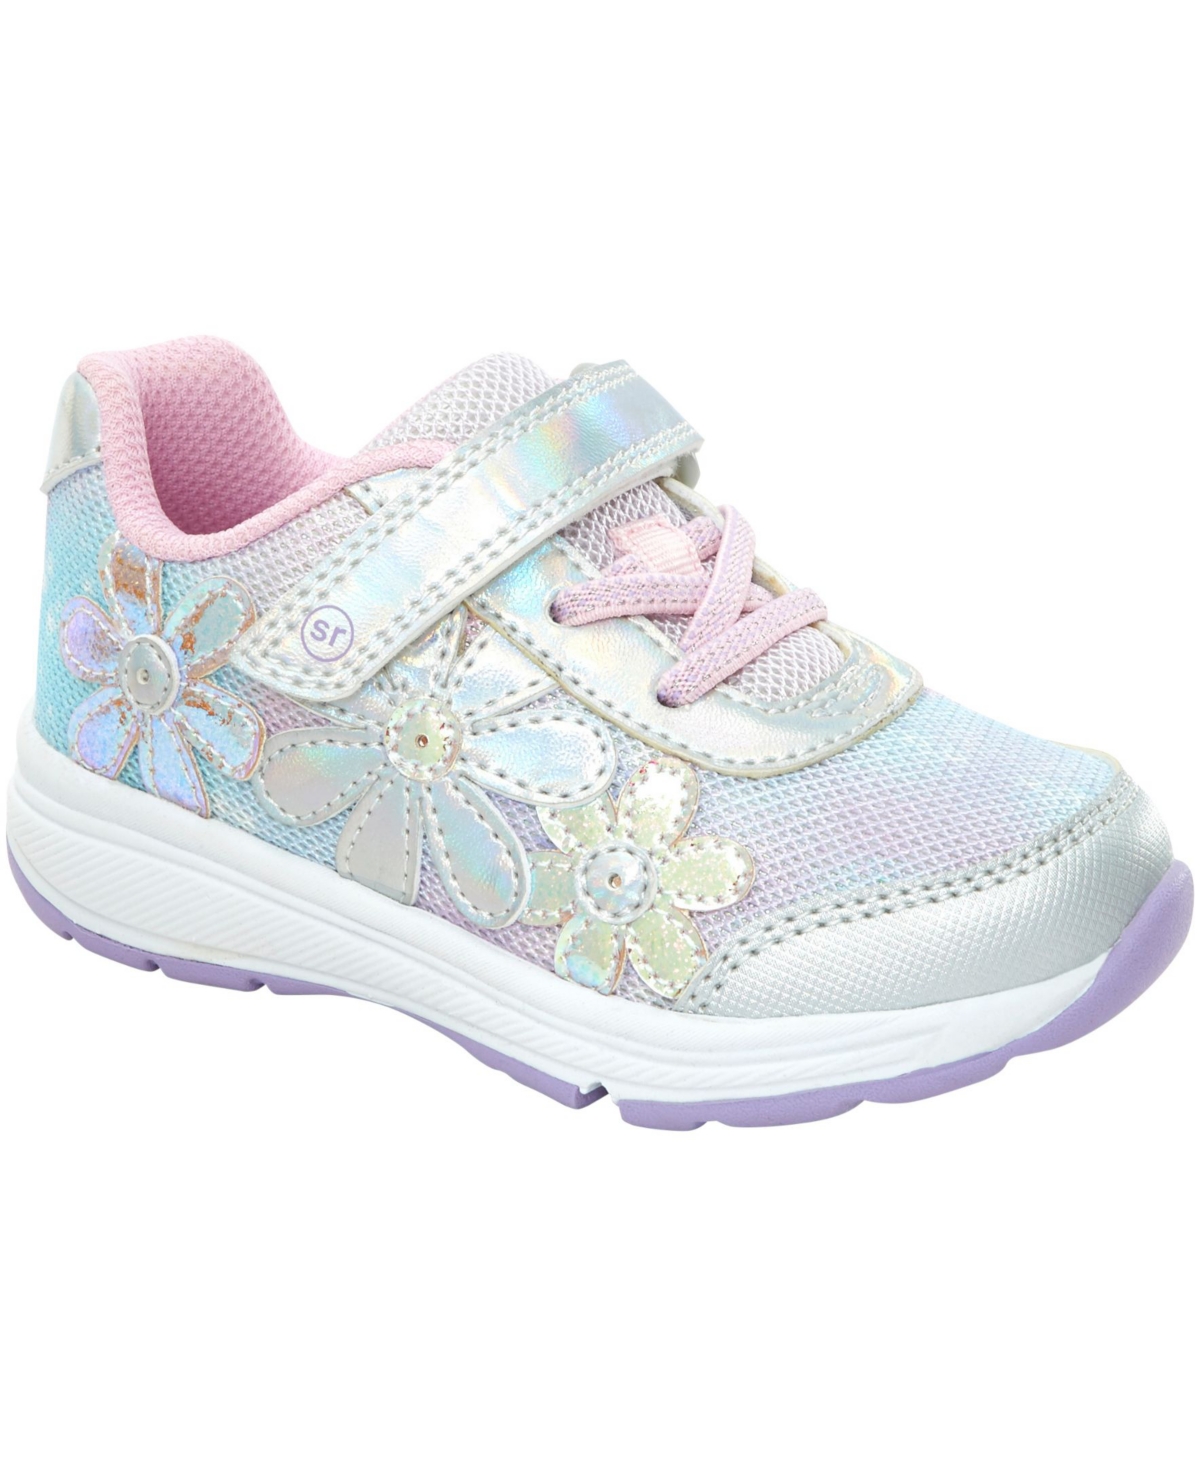 Shop Stride Rite Toddler Girls Sr Glimmer Lighted Sneakers In Iridescent